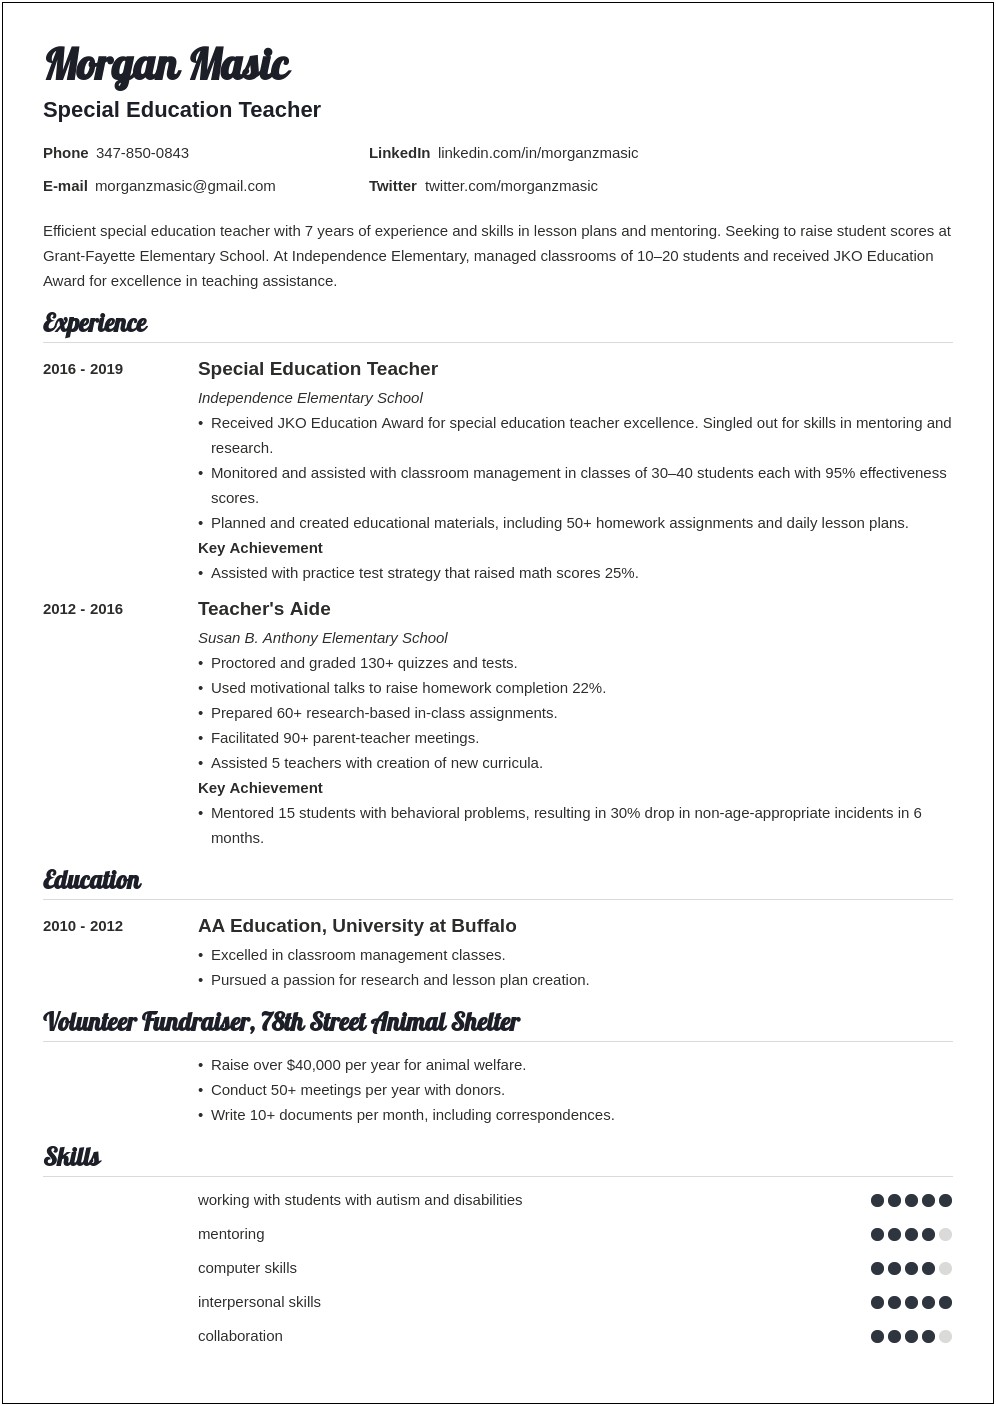 Resume Objective Statement Special Education Teacher